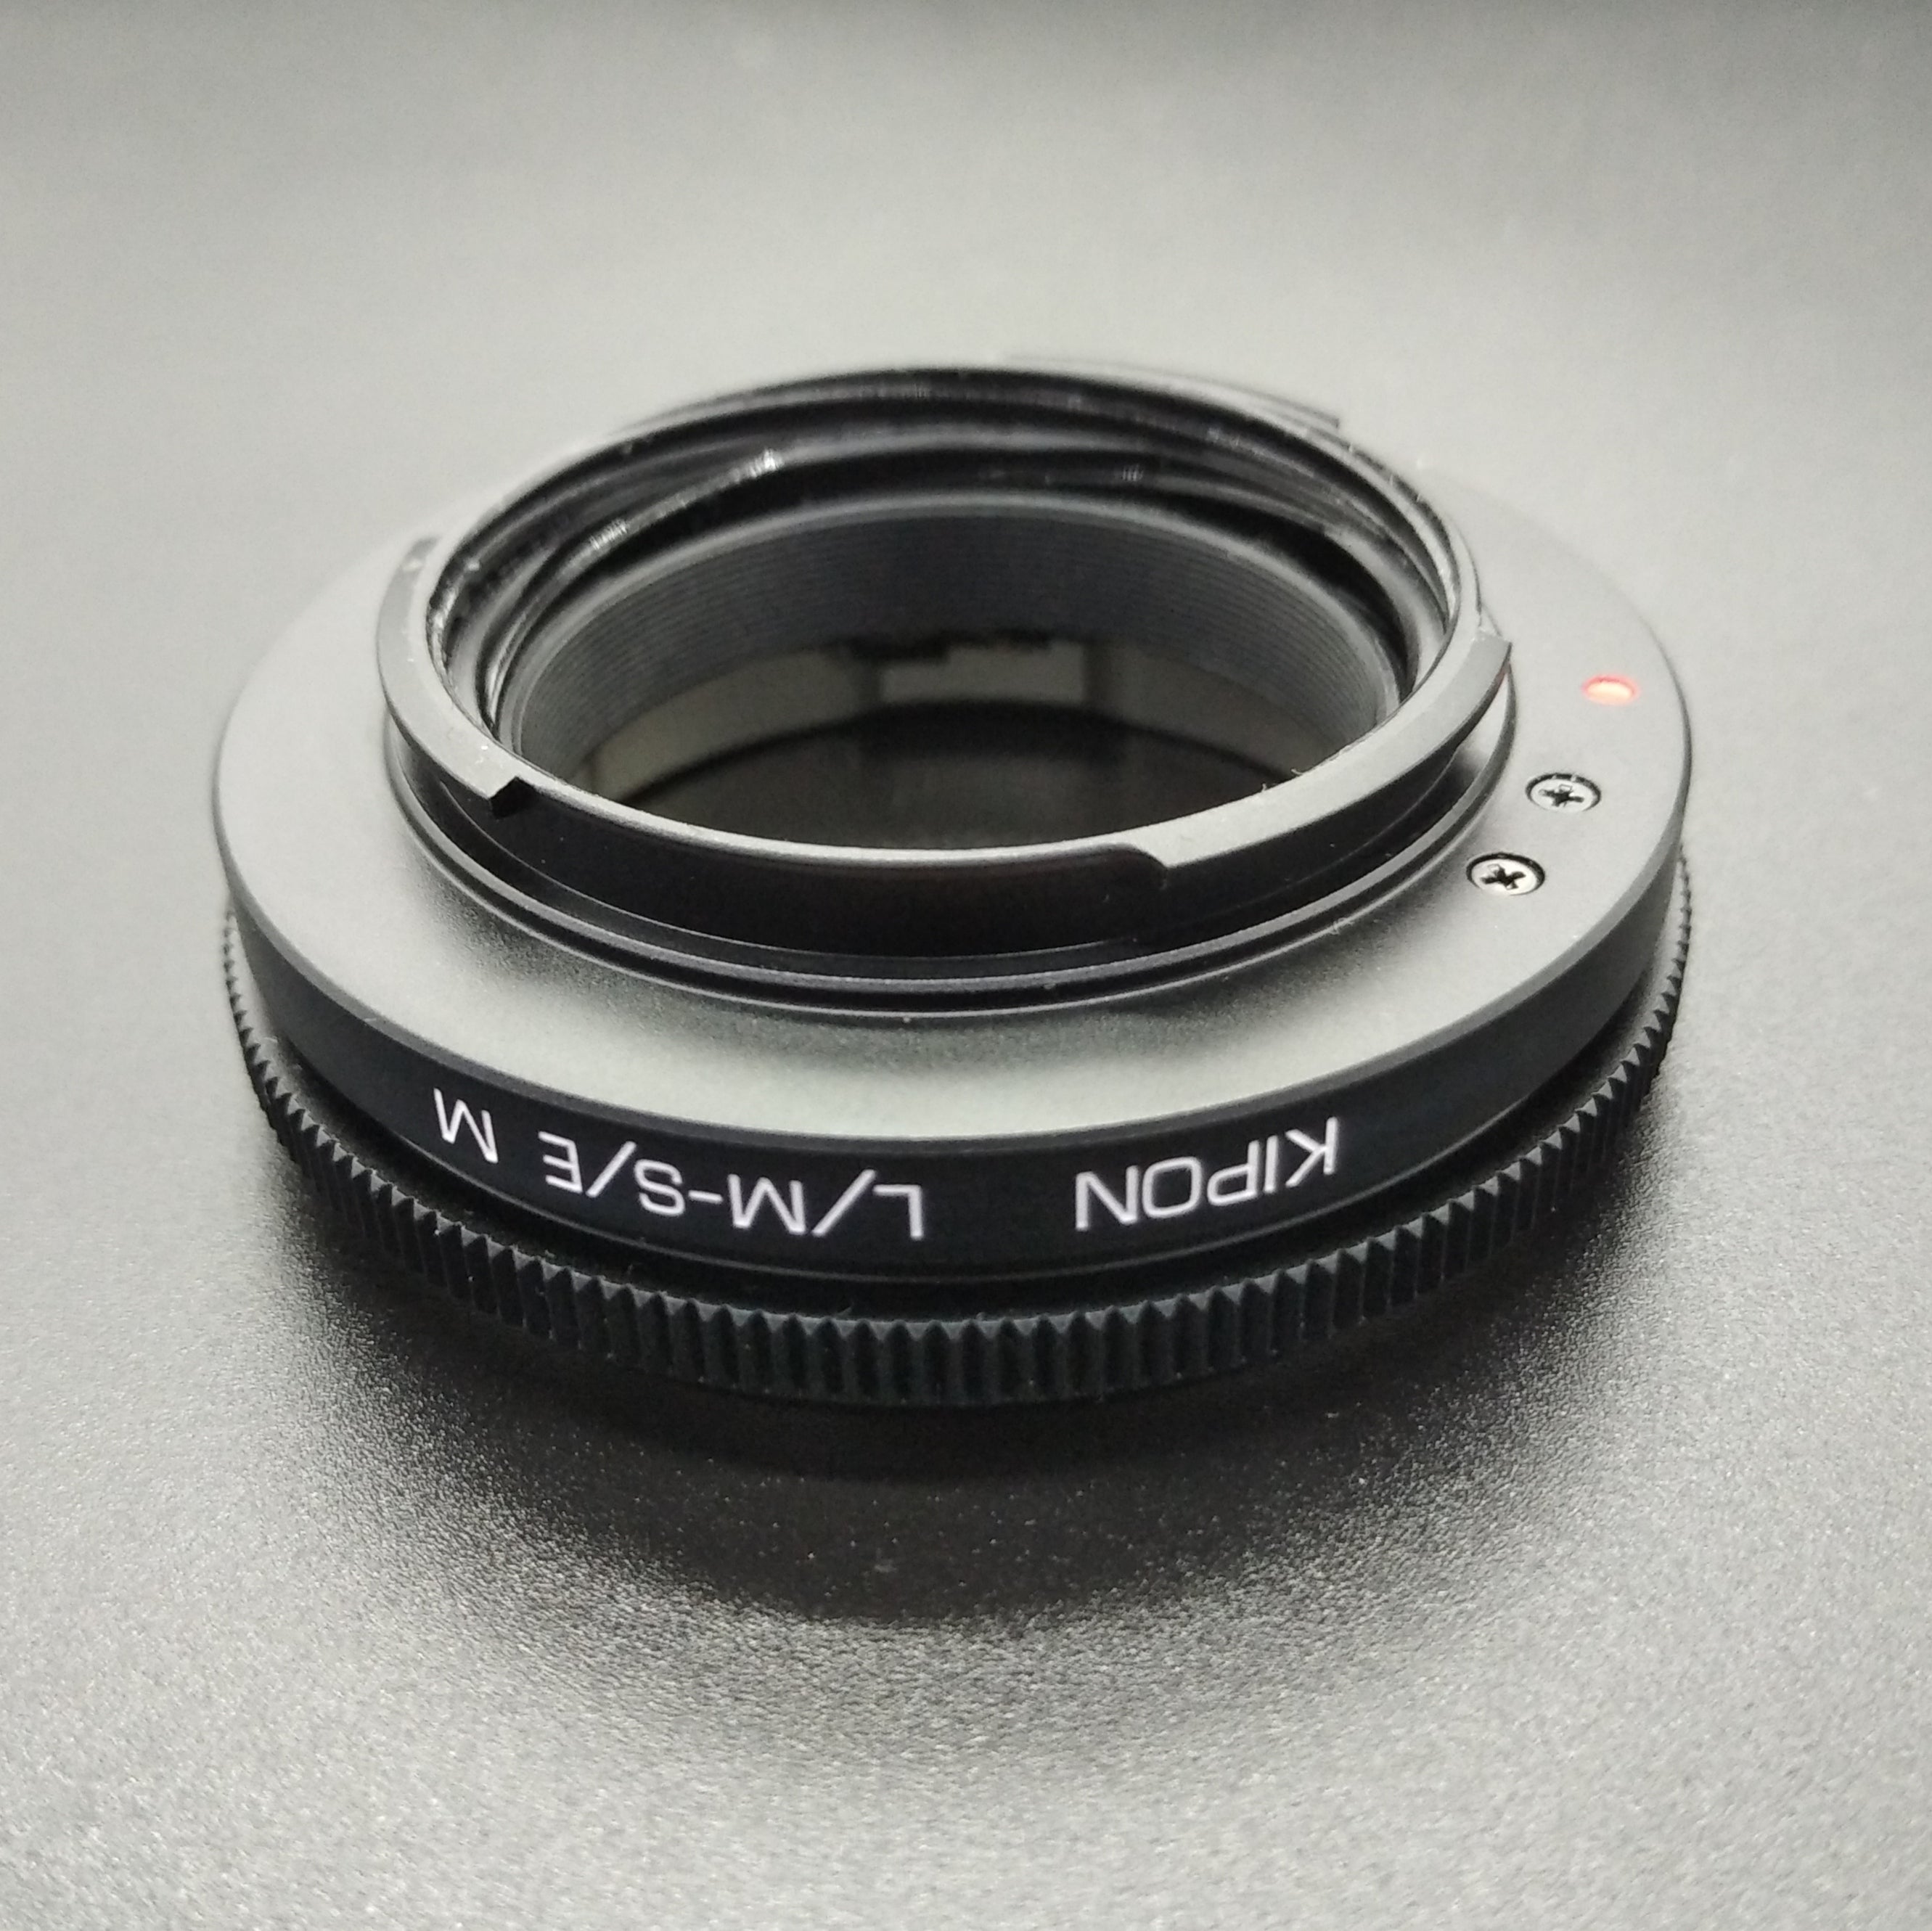 Kipon Leica M L/M mount lens to Sony NEX E mount mirrorless camera adapter - macro helicoid ring - A7 A7R IV V A7S III A6000 A6500 A5000